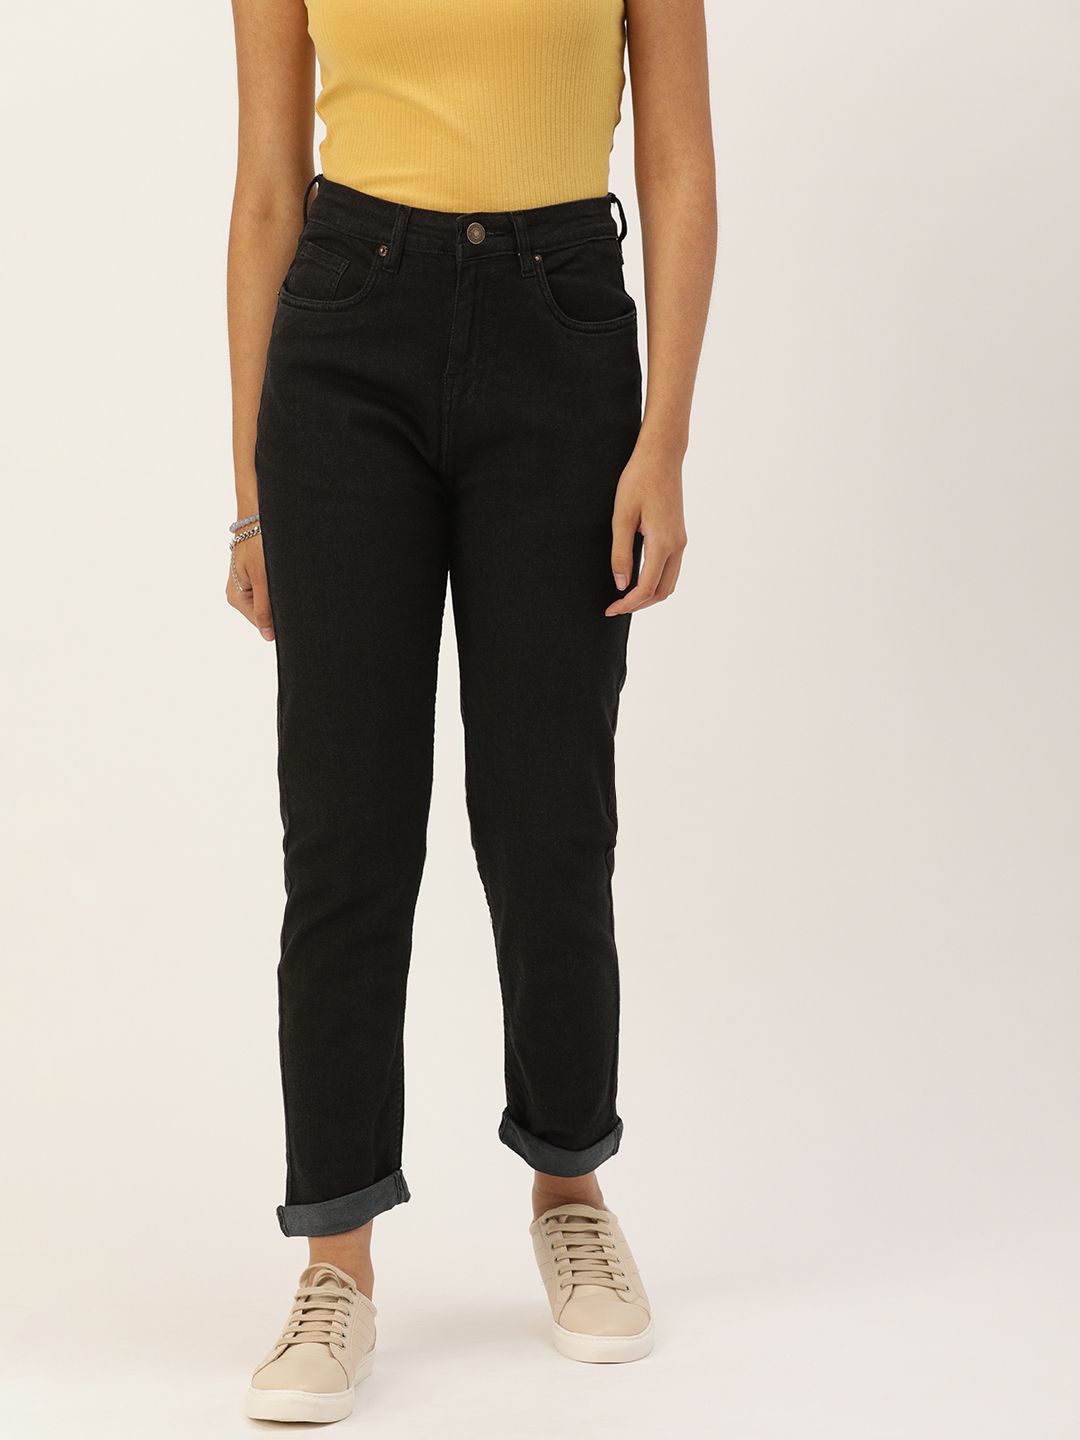 FOREVER 21 Women Black Regular Fit Mid-Rise Clean Look Stretchable Jeans Price in India